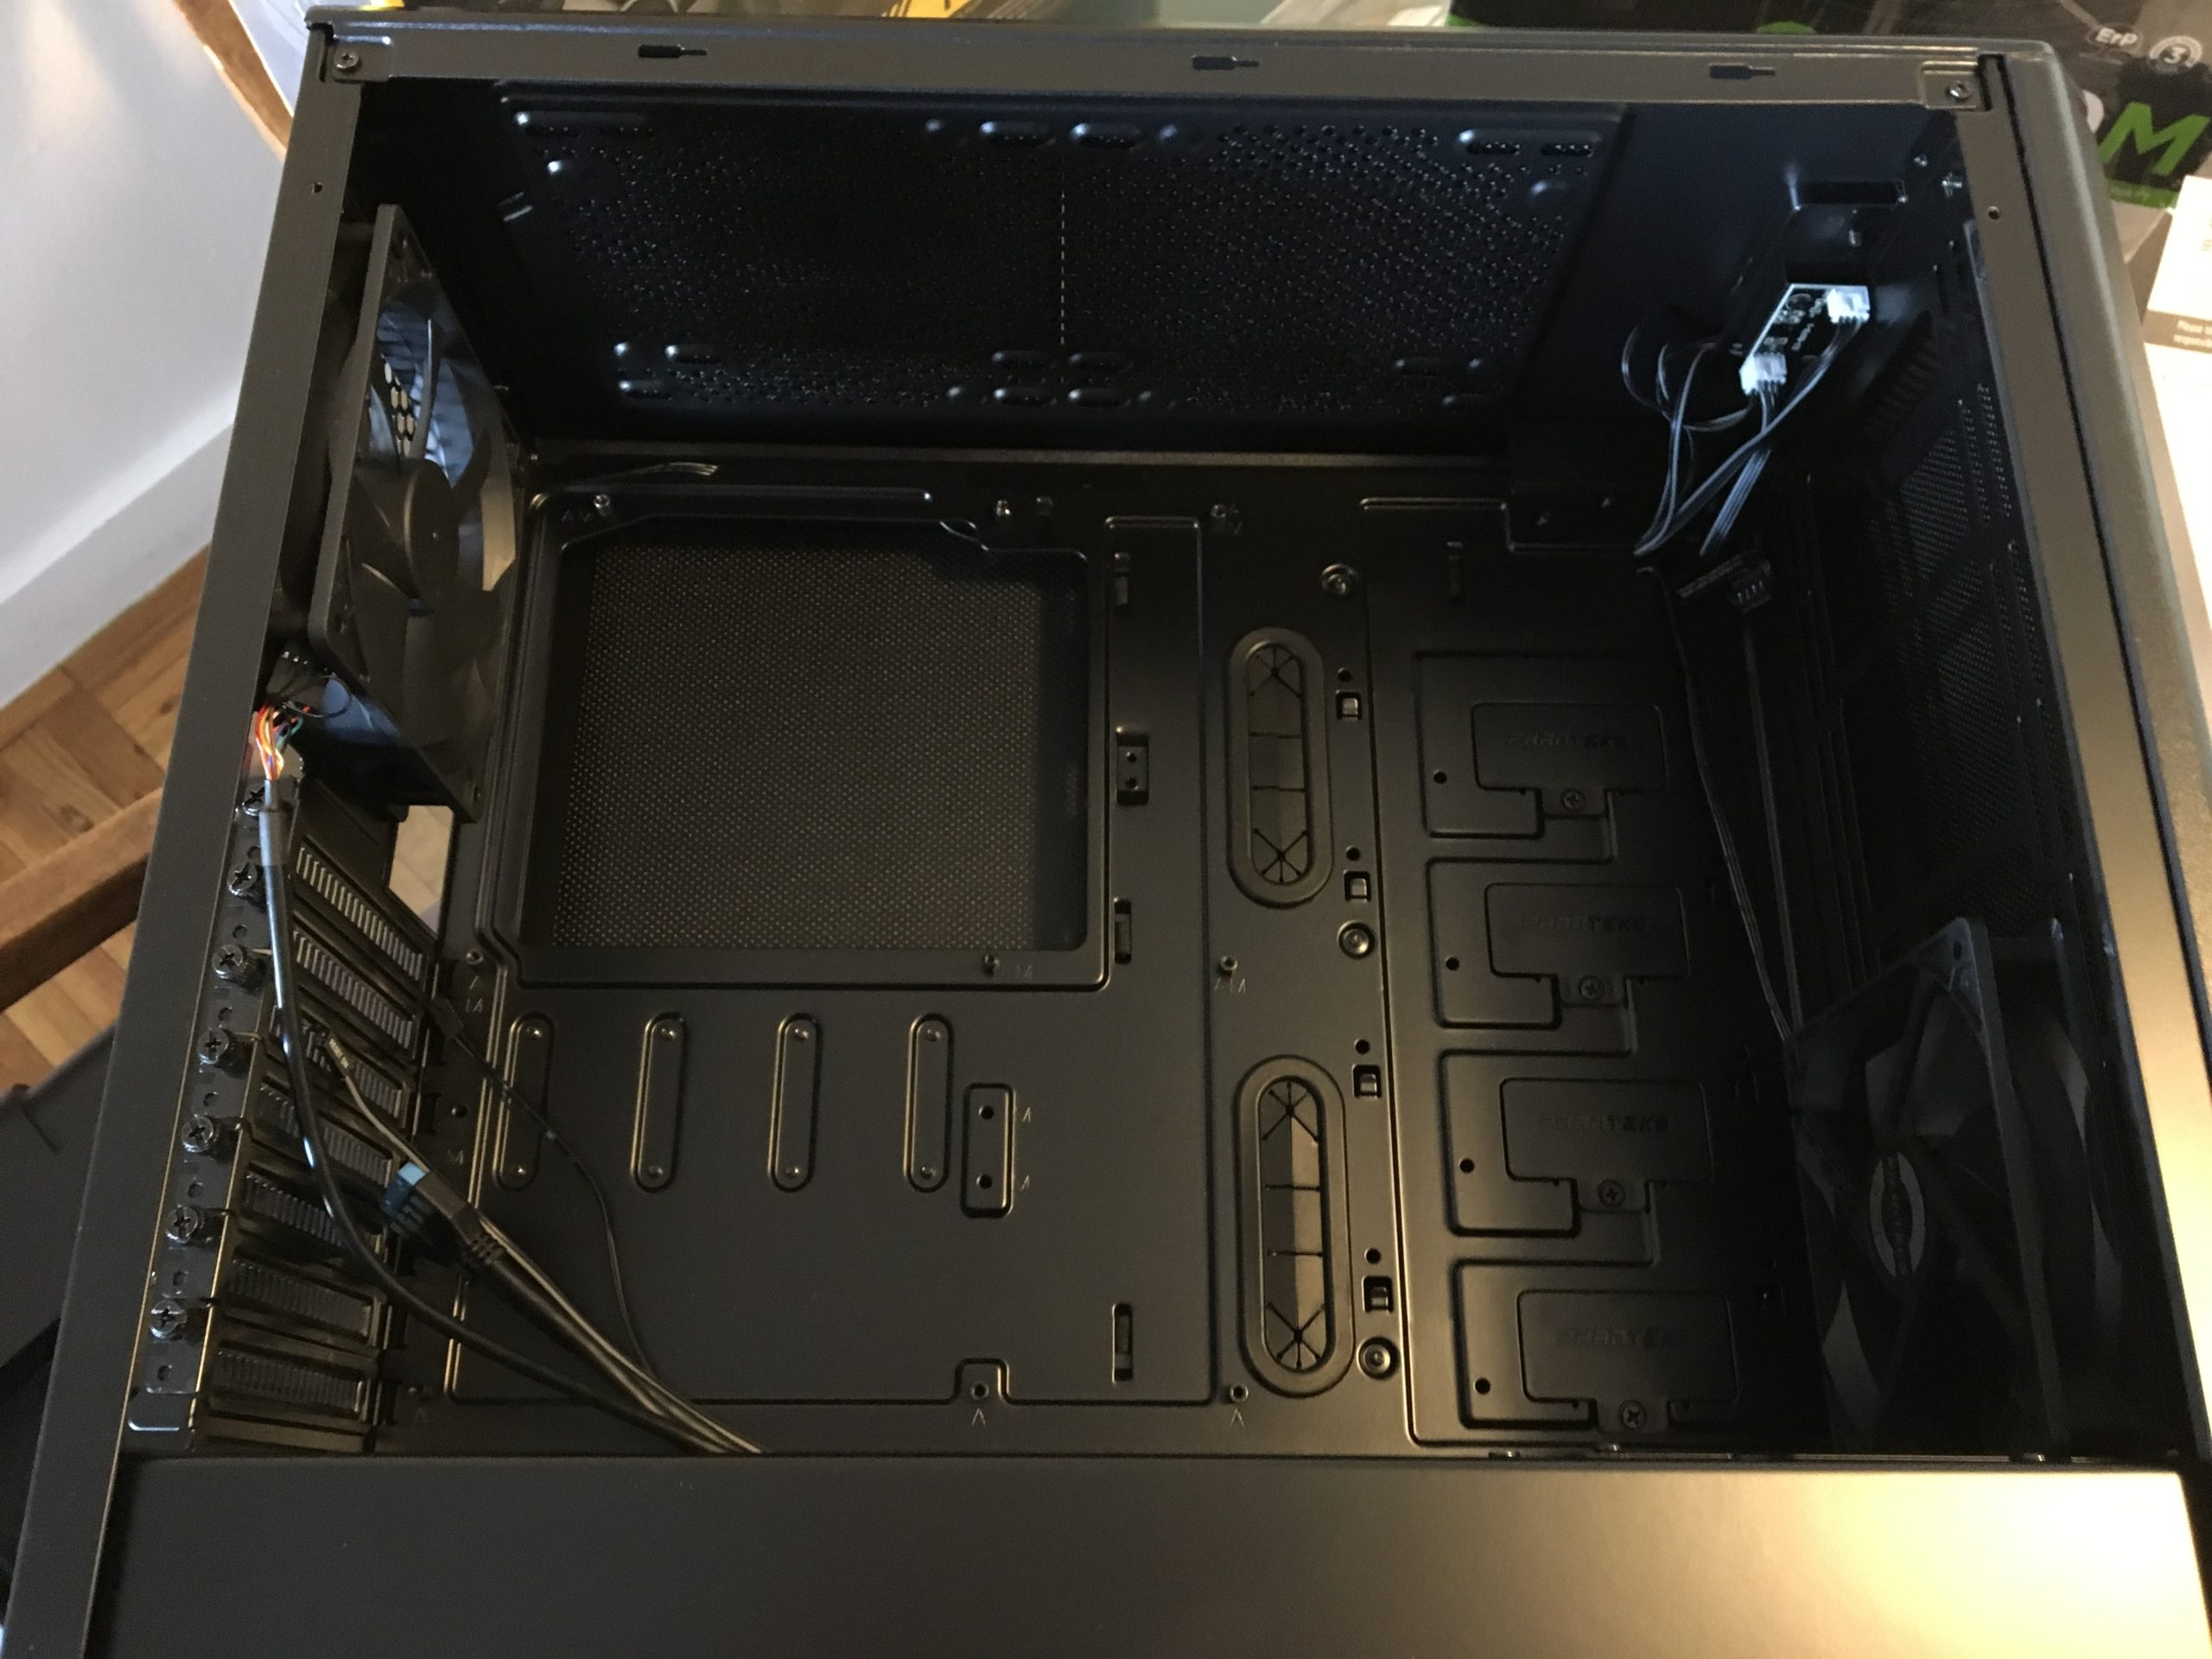 My PC Building Adventure, Part Two: Something Went Horribly Wrong